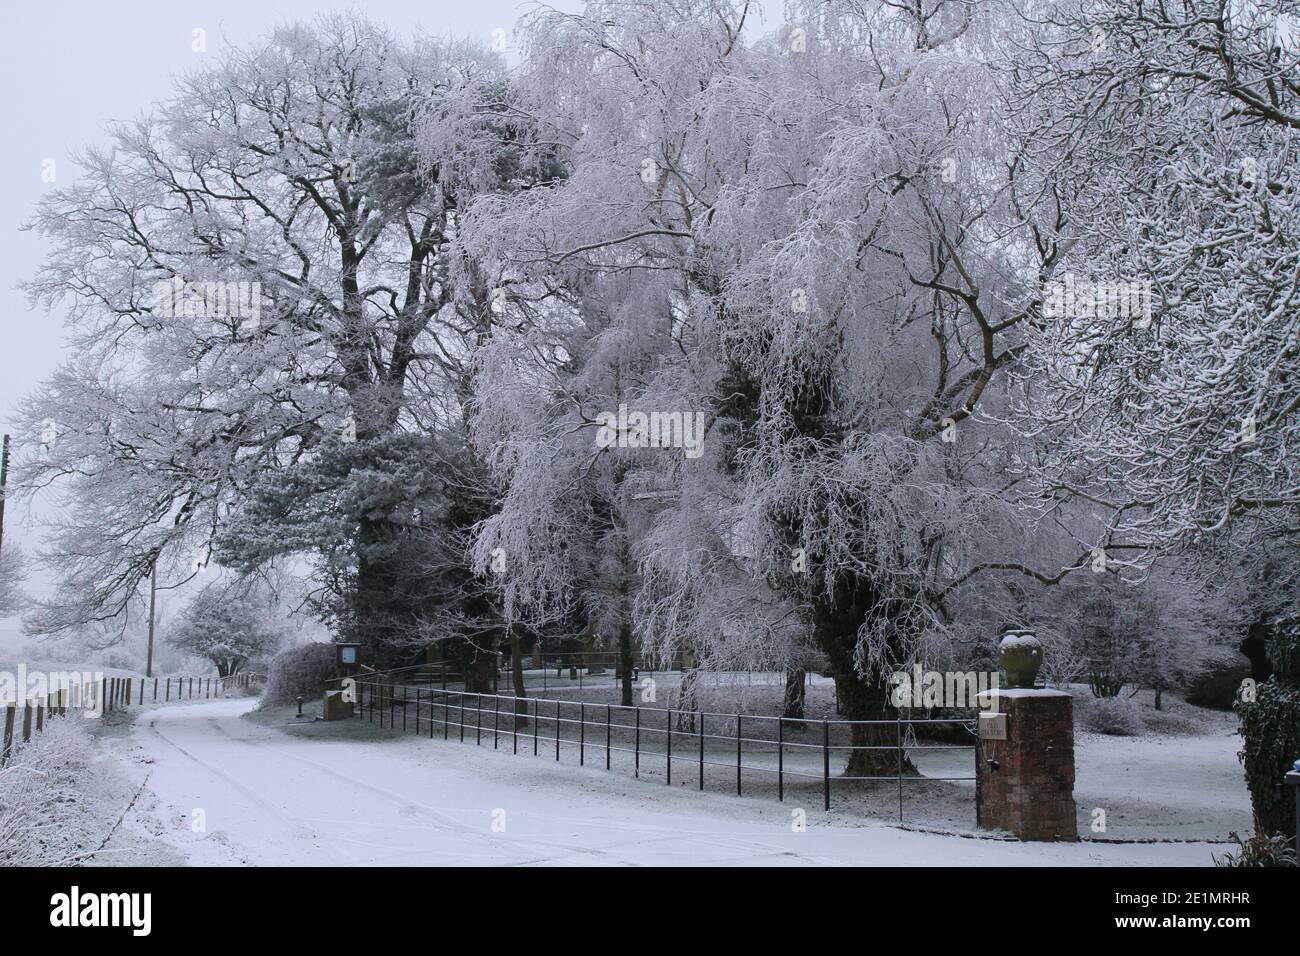 A Country Lane in the Snow, Kinwarton,near Alcester, Warwickshire, UK. Shakespeare's County, a cold Christmas scene. Stock Photo